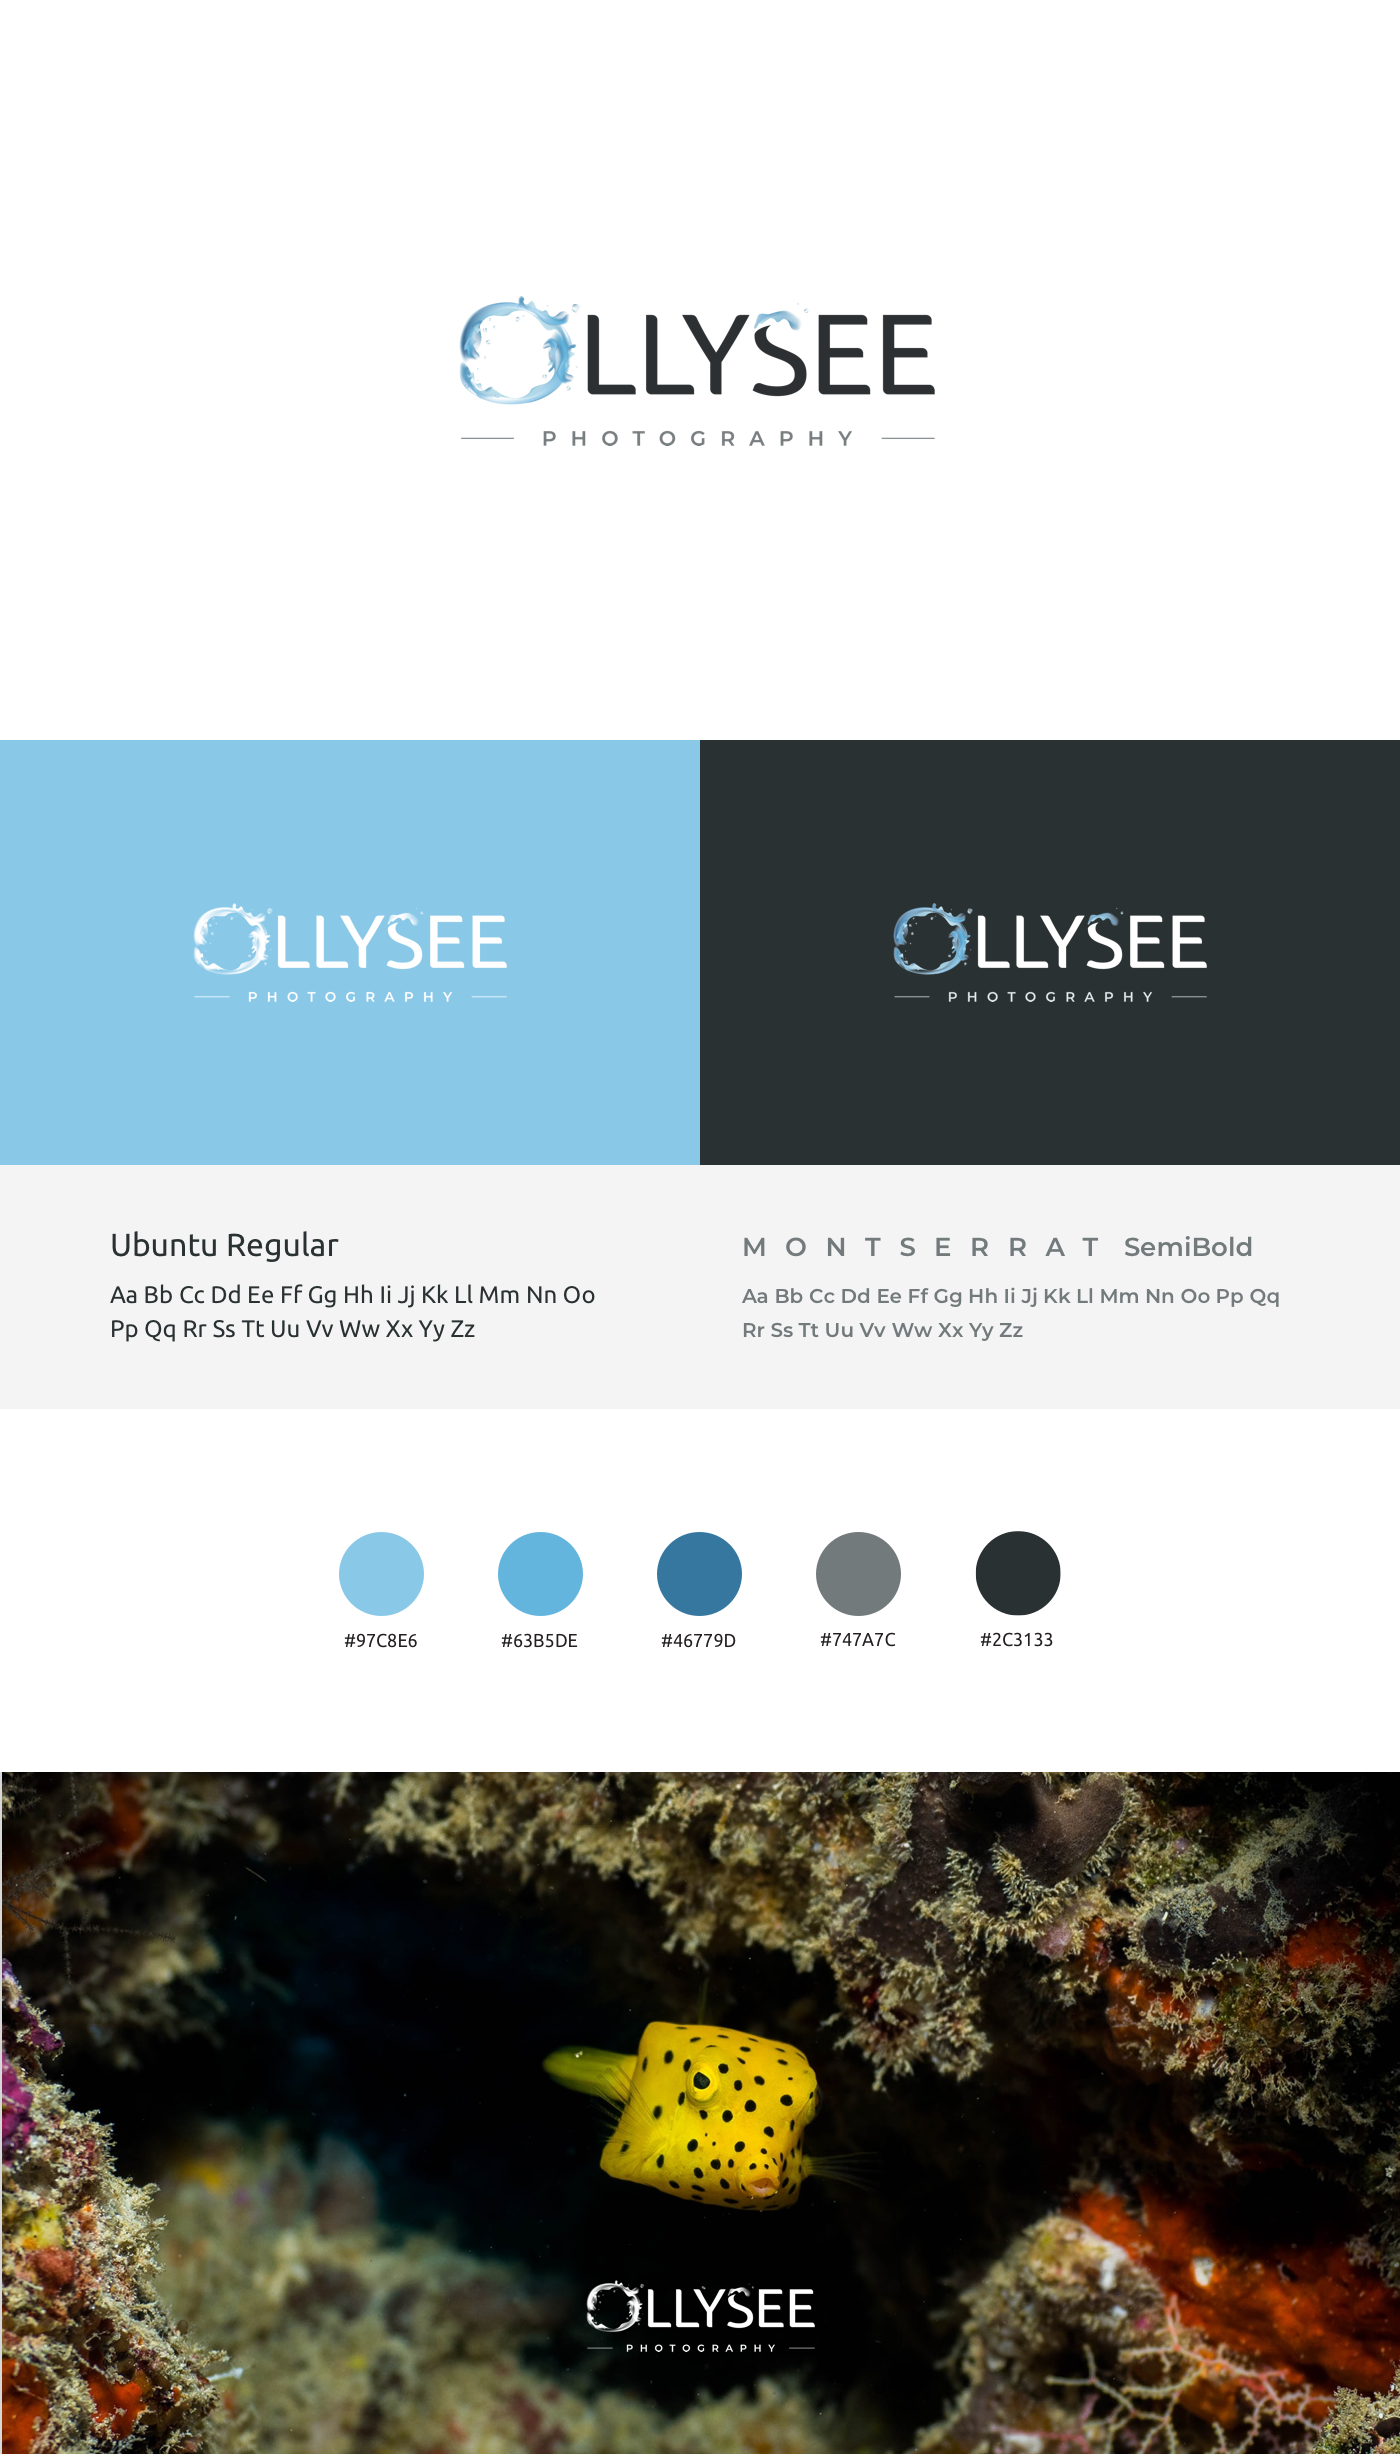 Ollysee logo project